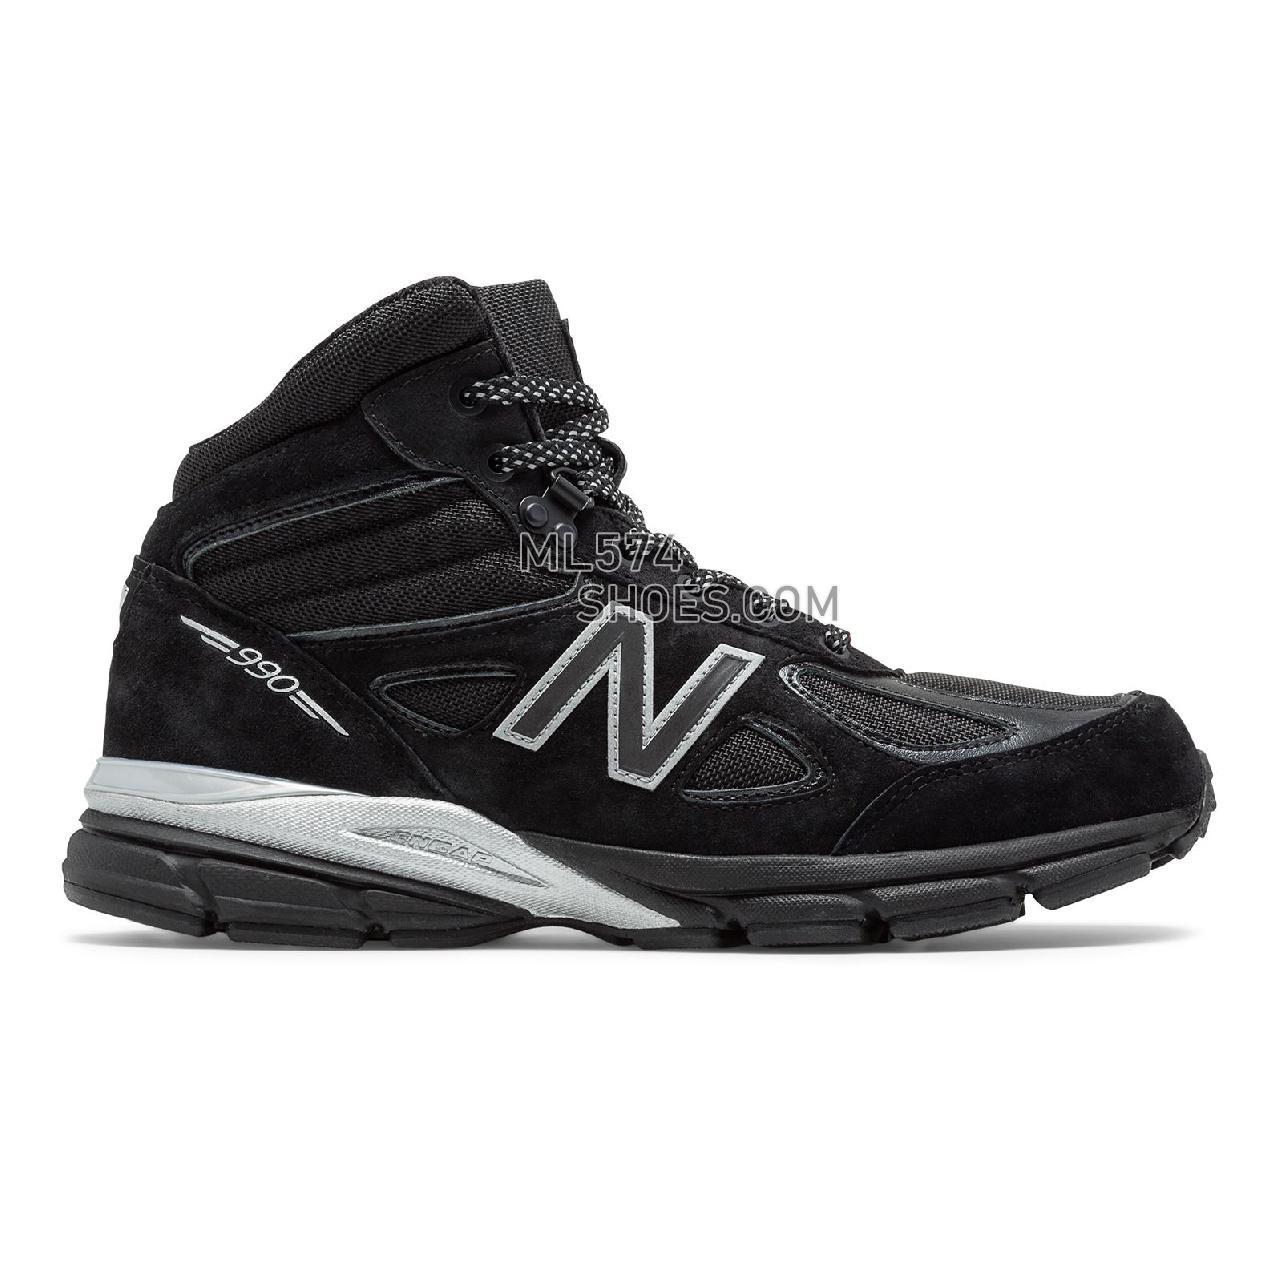 New Balance Mens 990v4 Mid Made in US Black Panther - Men's 990 - Boots Black with Silver - MO990BP4